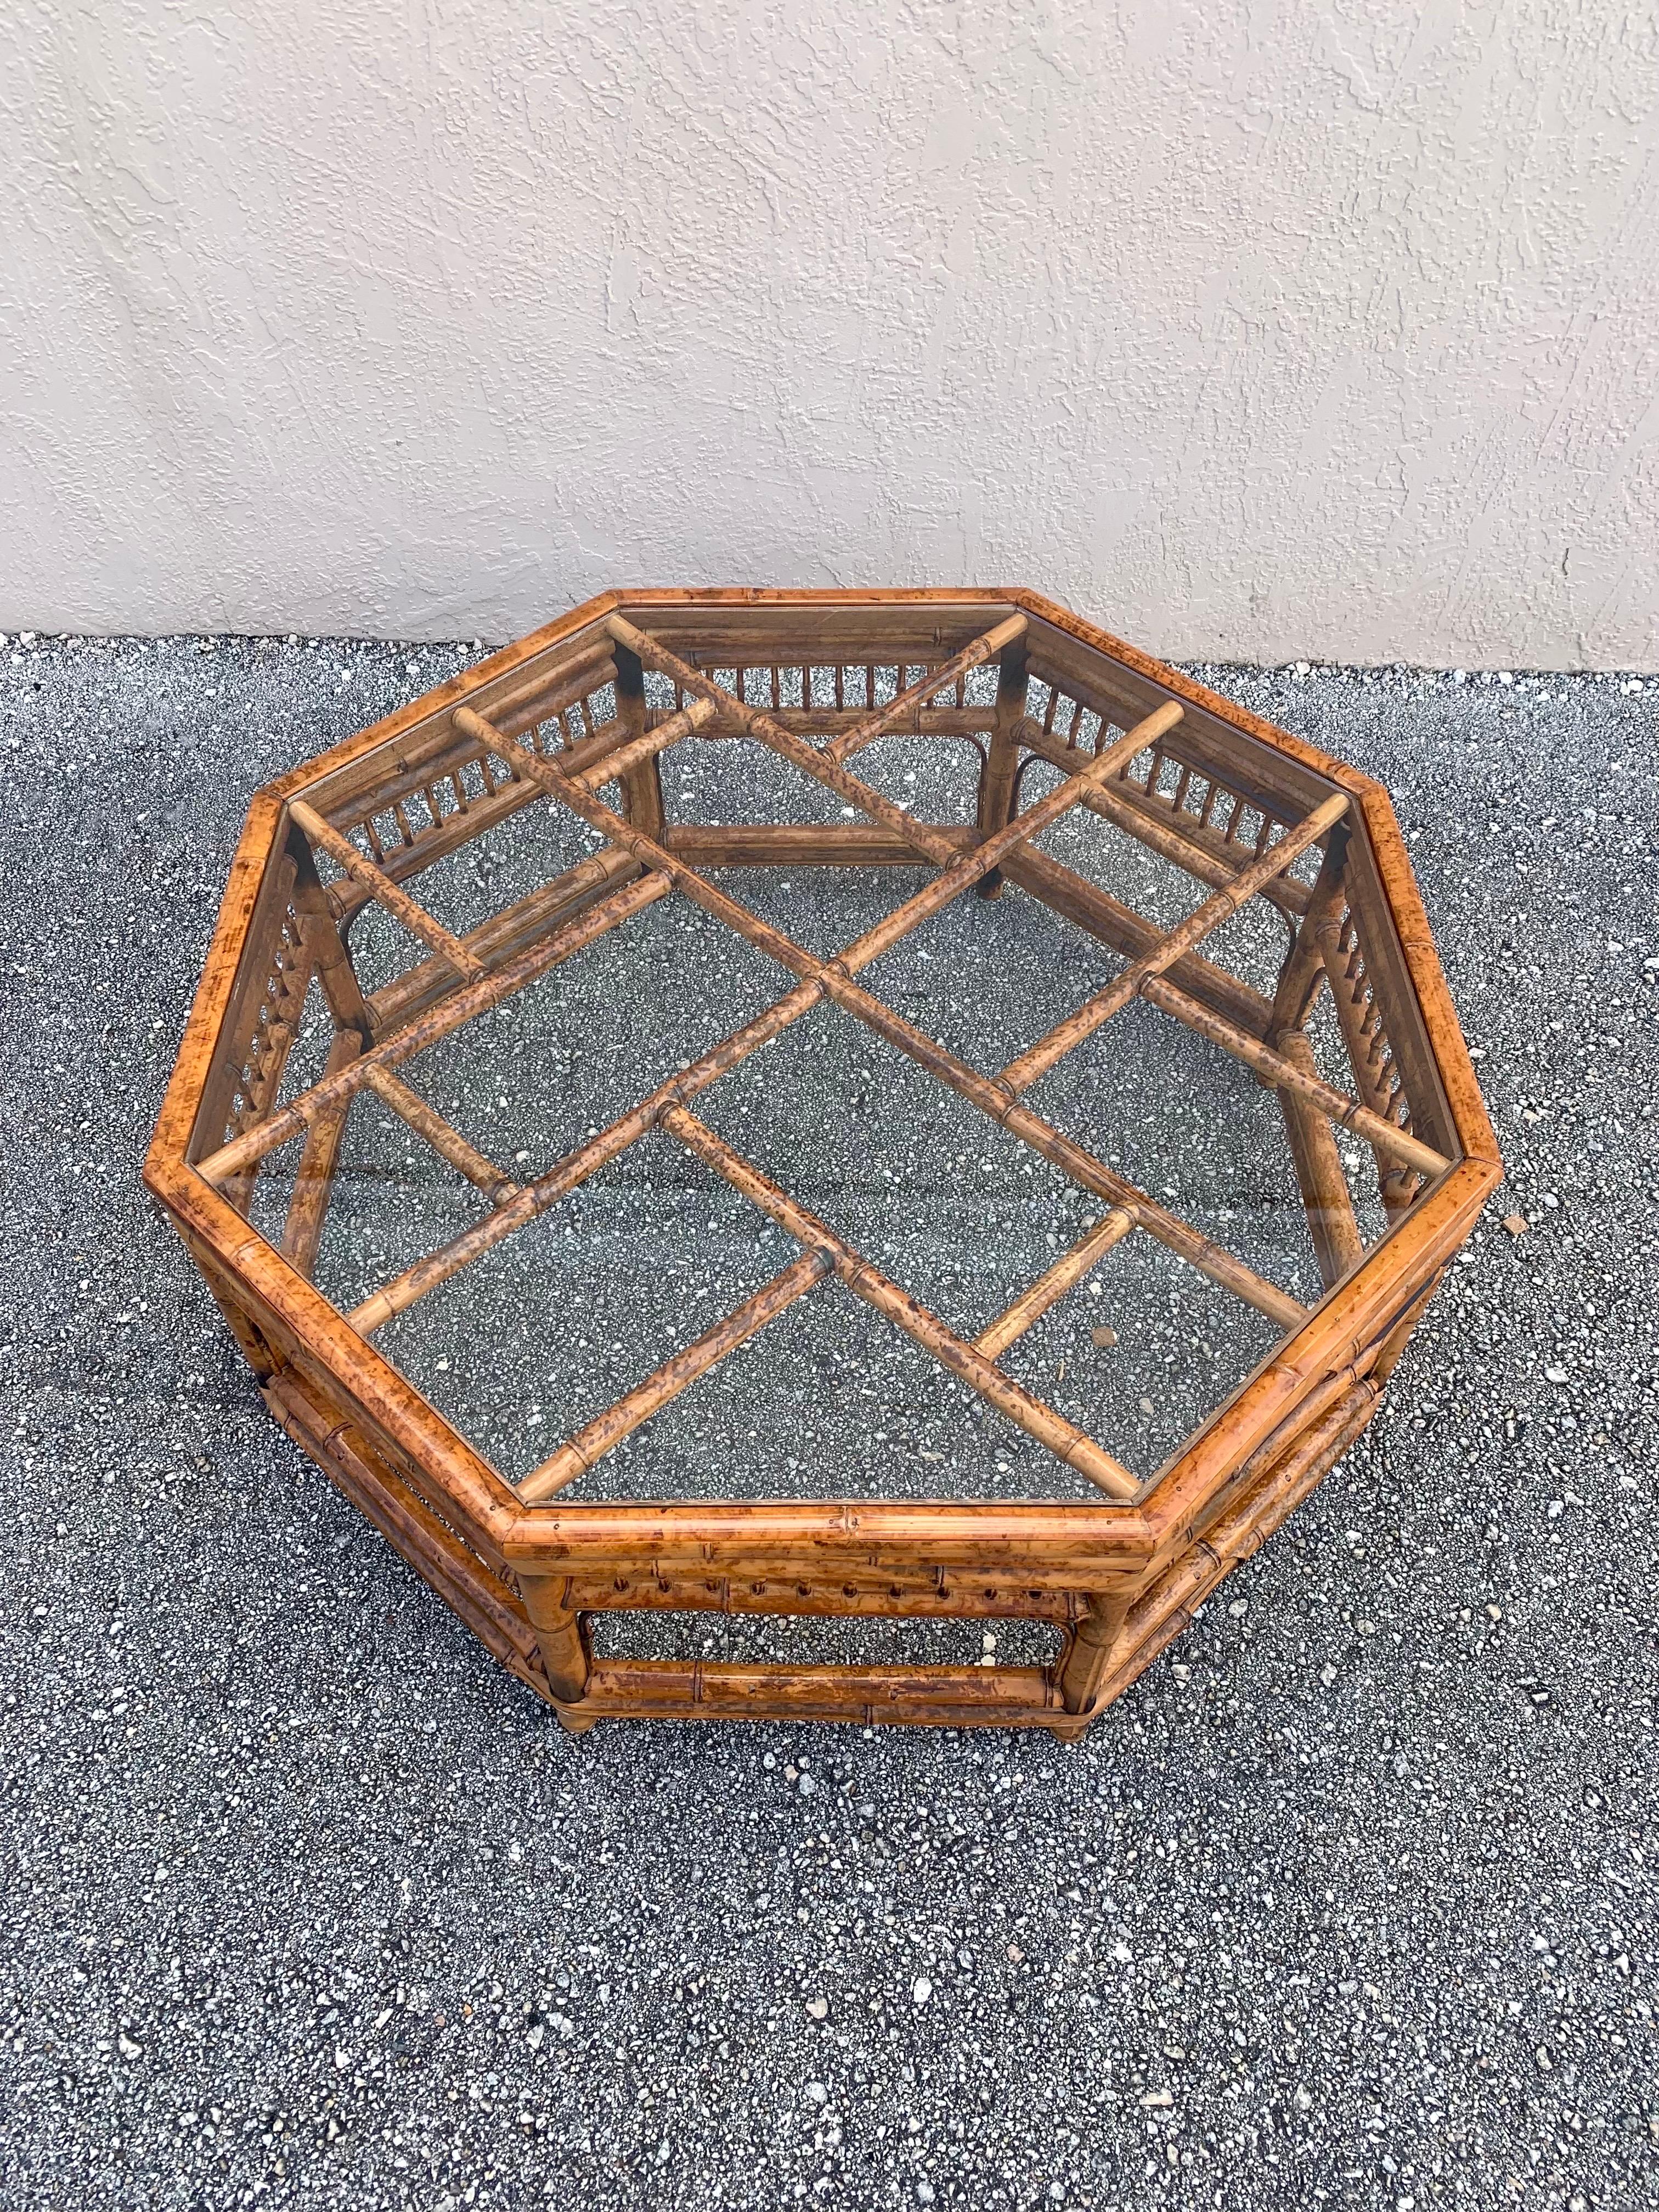 Octagonal coffee table hand made with bamboo. Expertly crafted and beautifully finished with burning techniques. 

Construction is entirely different sized bamboo and nails. 

Lots of different architectural designs including chippendale cross